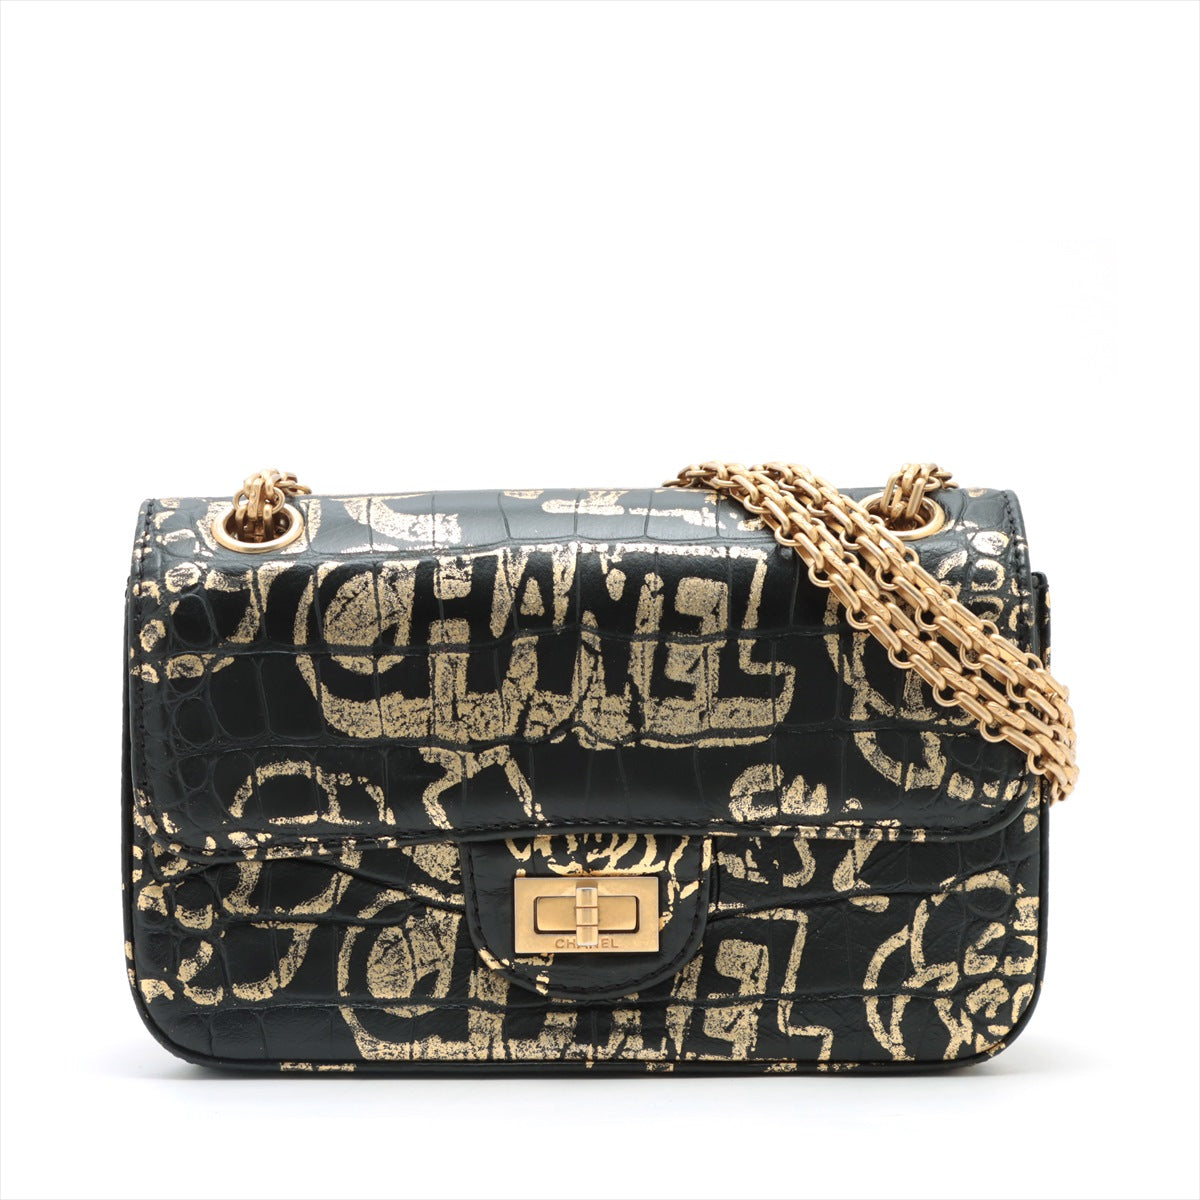 Chanel 2.55 Leather Single flap Double chain bag Graffiti Black Gold Metal fittings 28th